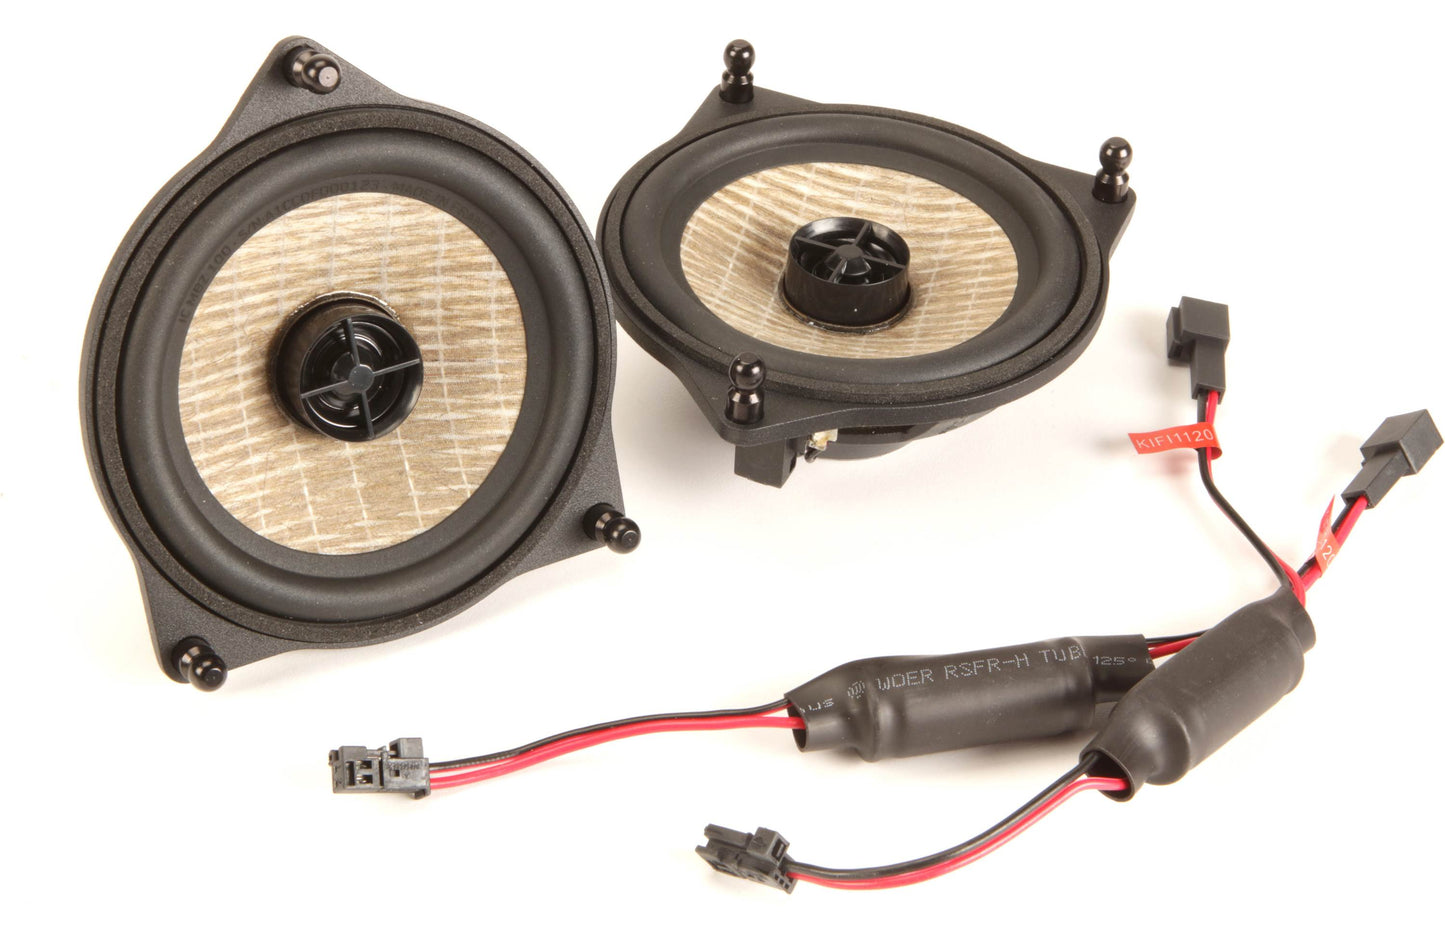 Focal Inside IC MBZ 100 4" 2-way speakers for select Mercedes-Benz vehicles